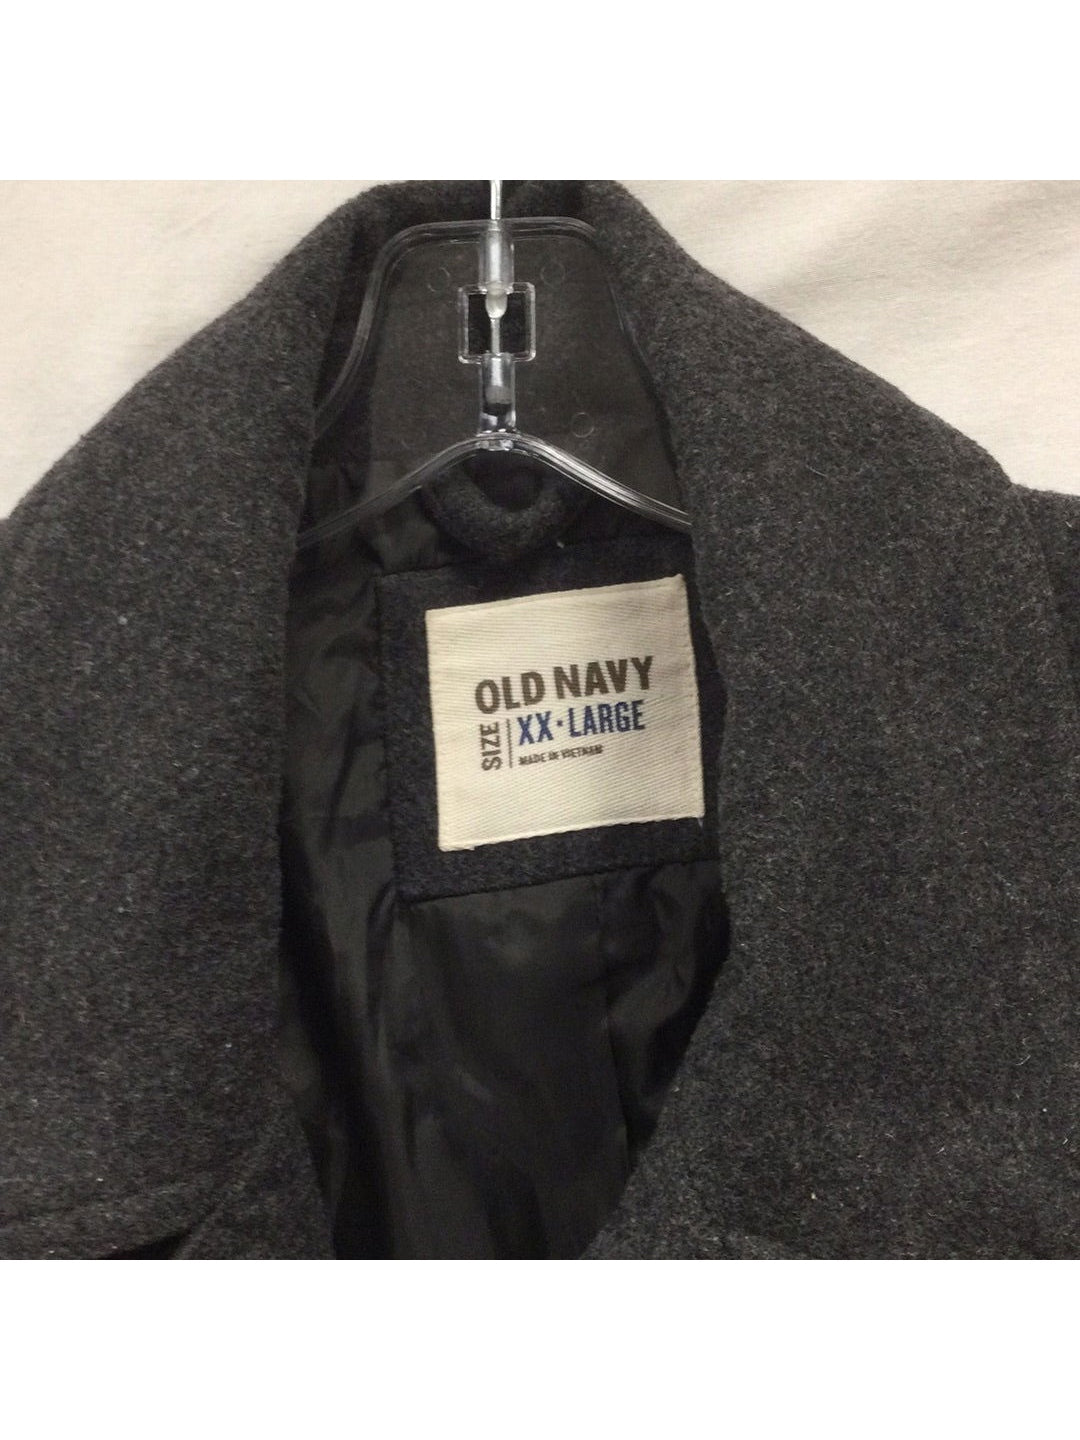 Old Navy Ladies Grey X X Large Blazer - The Kennedy Collective Thrift - 